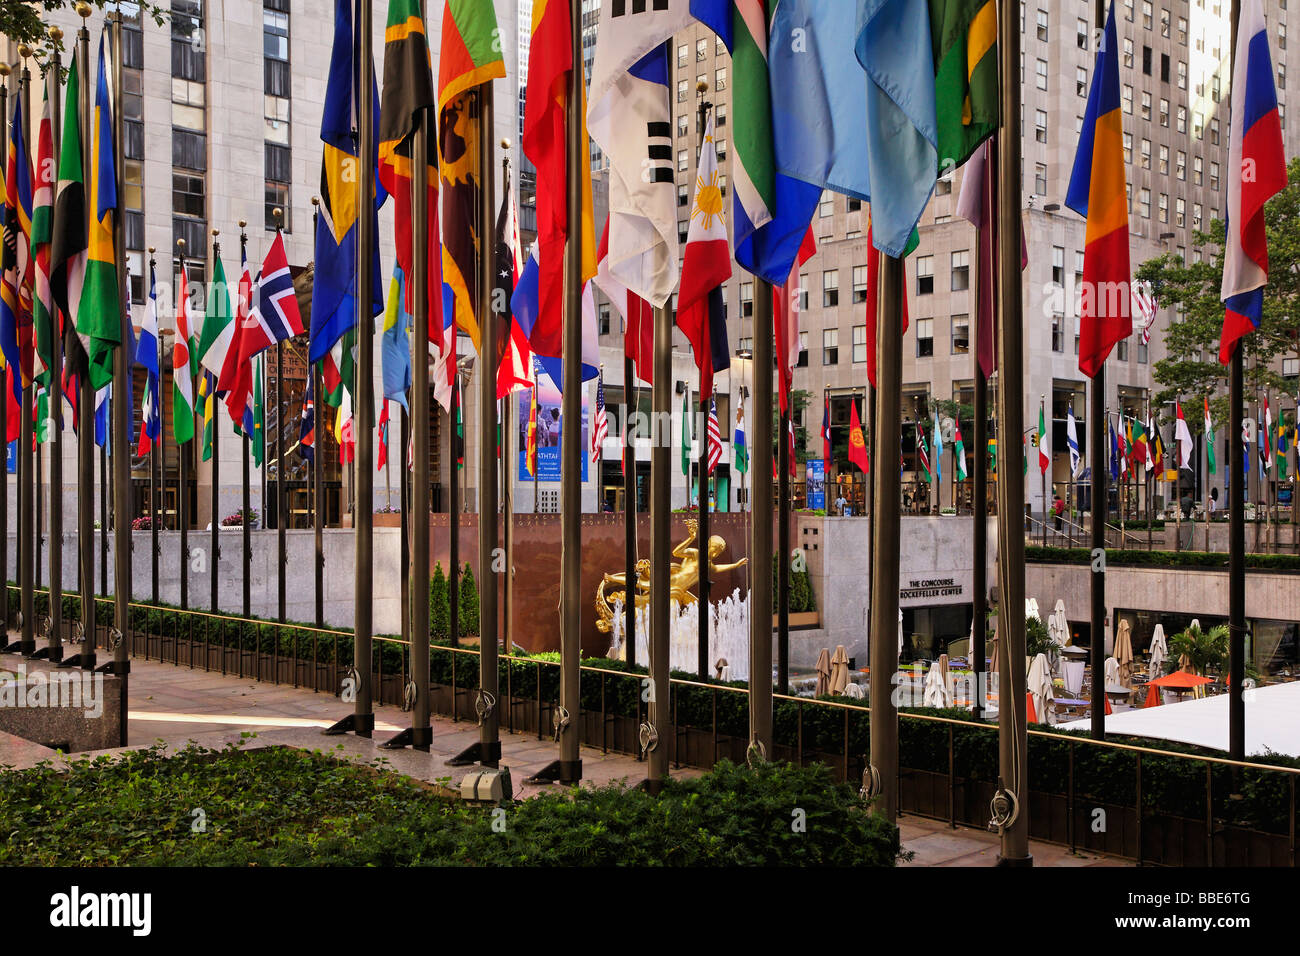 Rockefeller Plaza surrounded by 200 flagpoles representing countries of the United Nations Stock Photo